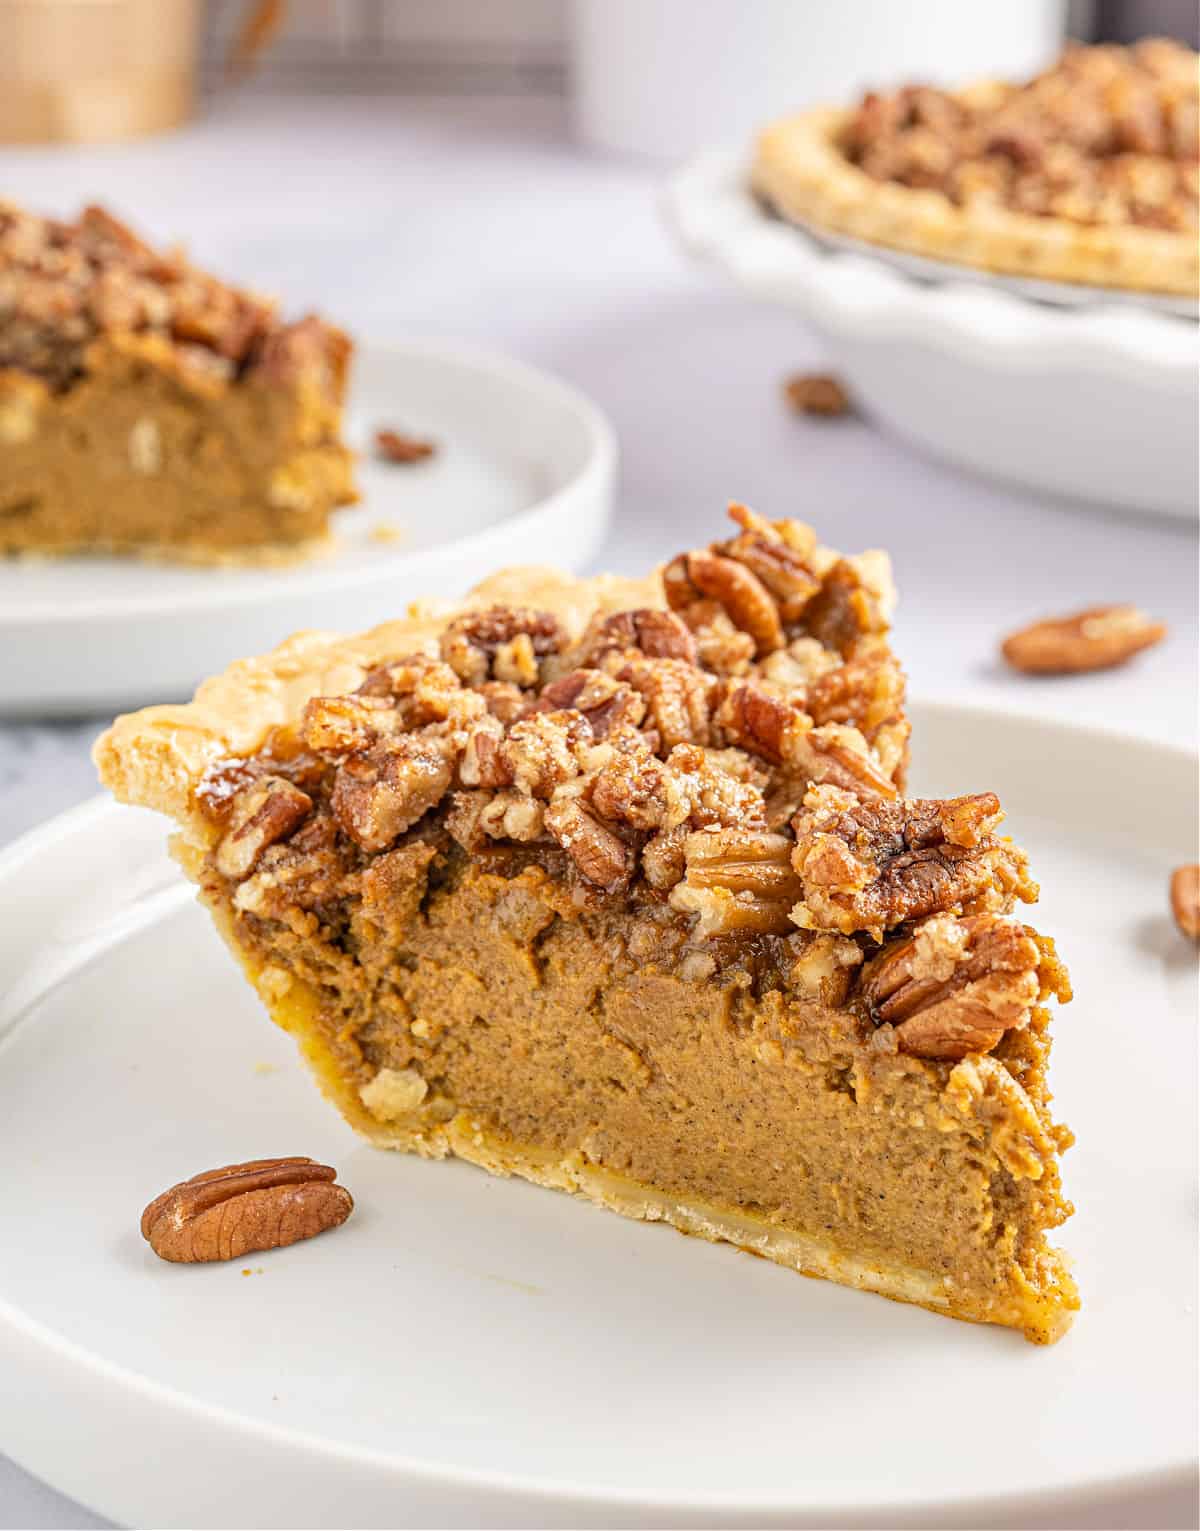 Pumpkin pie with pecan topping cut into a slice and served on a white plate.